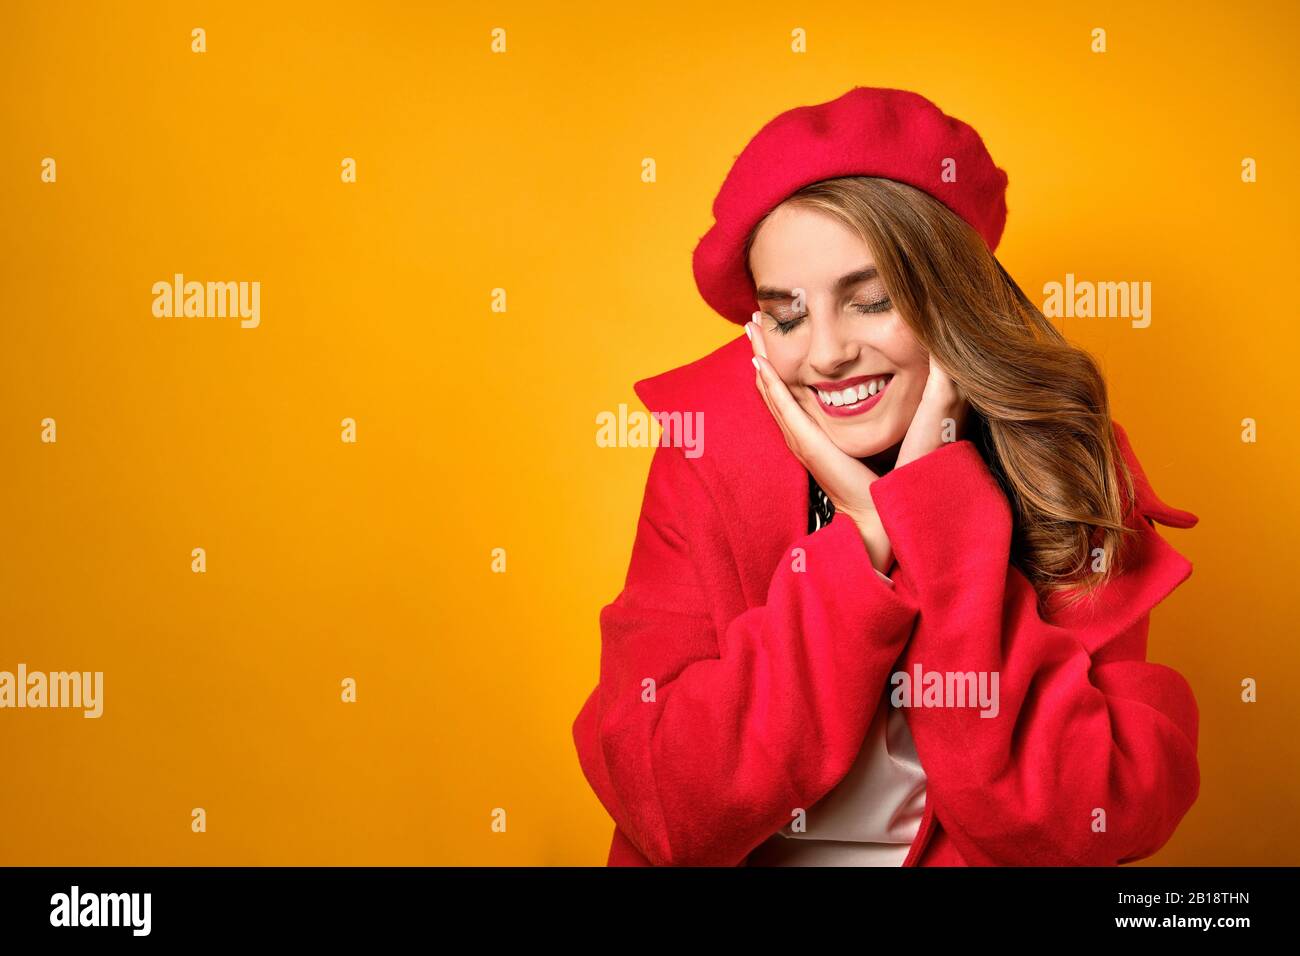 A girl in a red coat and beret is standing on a yellow background and sweetly squinting and smiling, presses her palms to her face Stock Photo